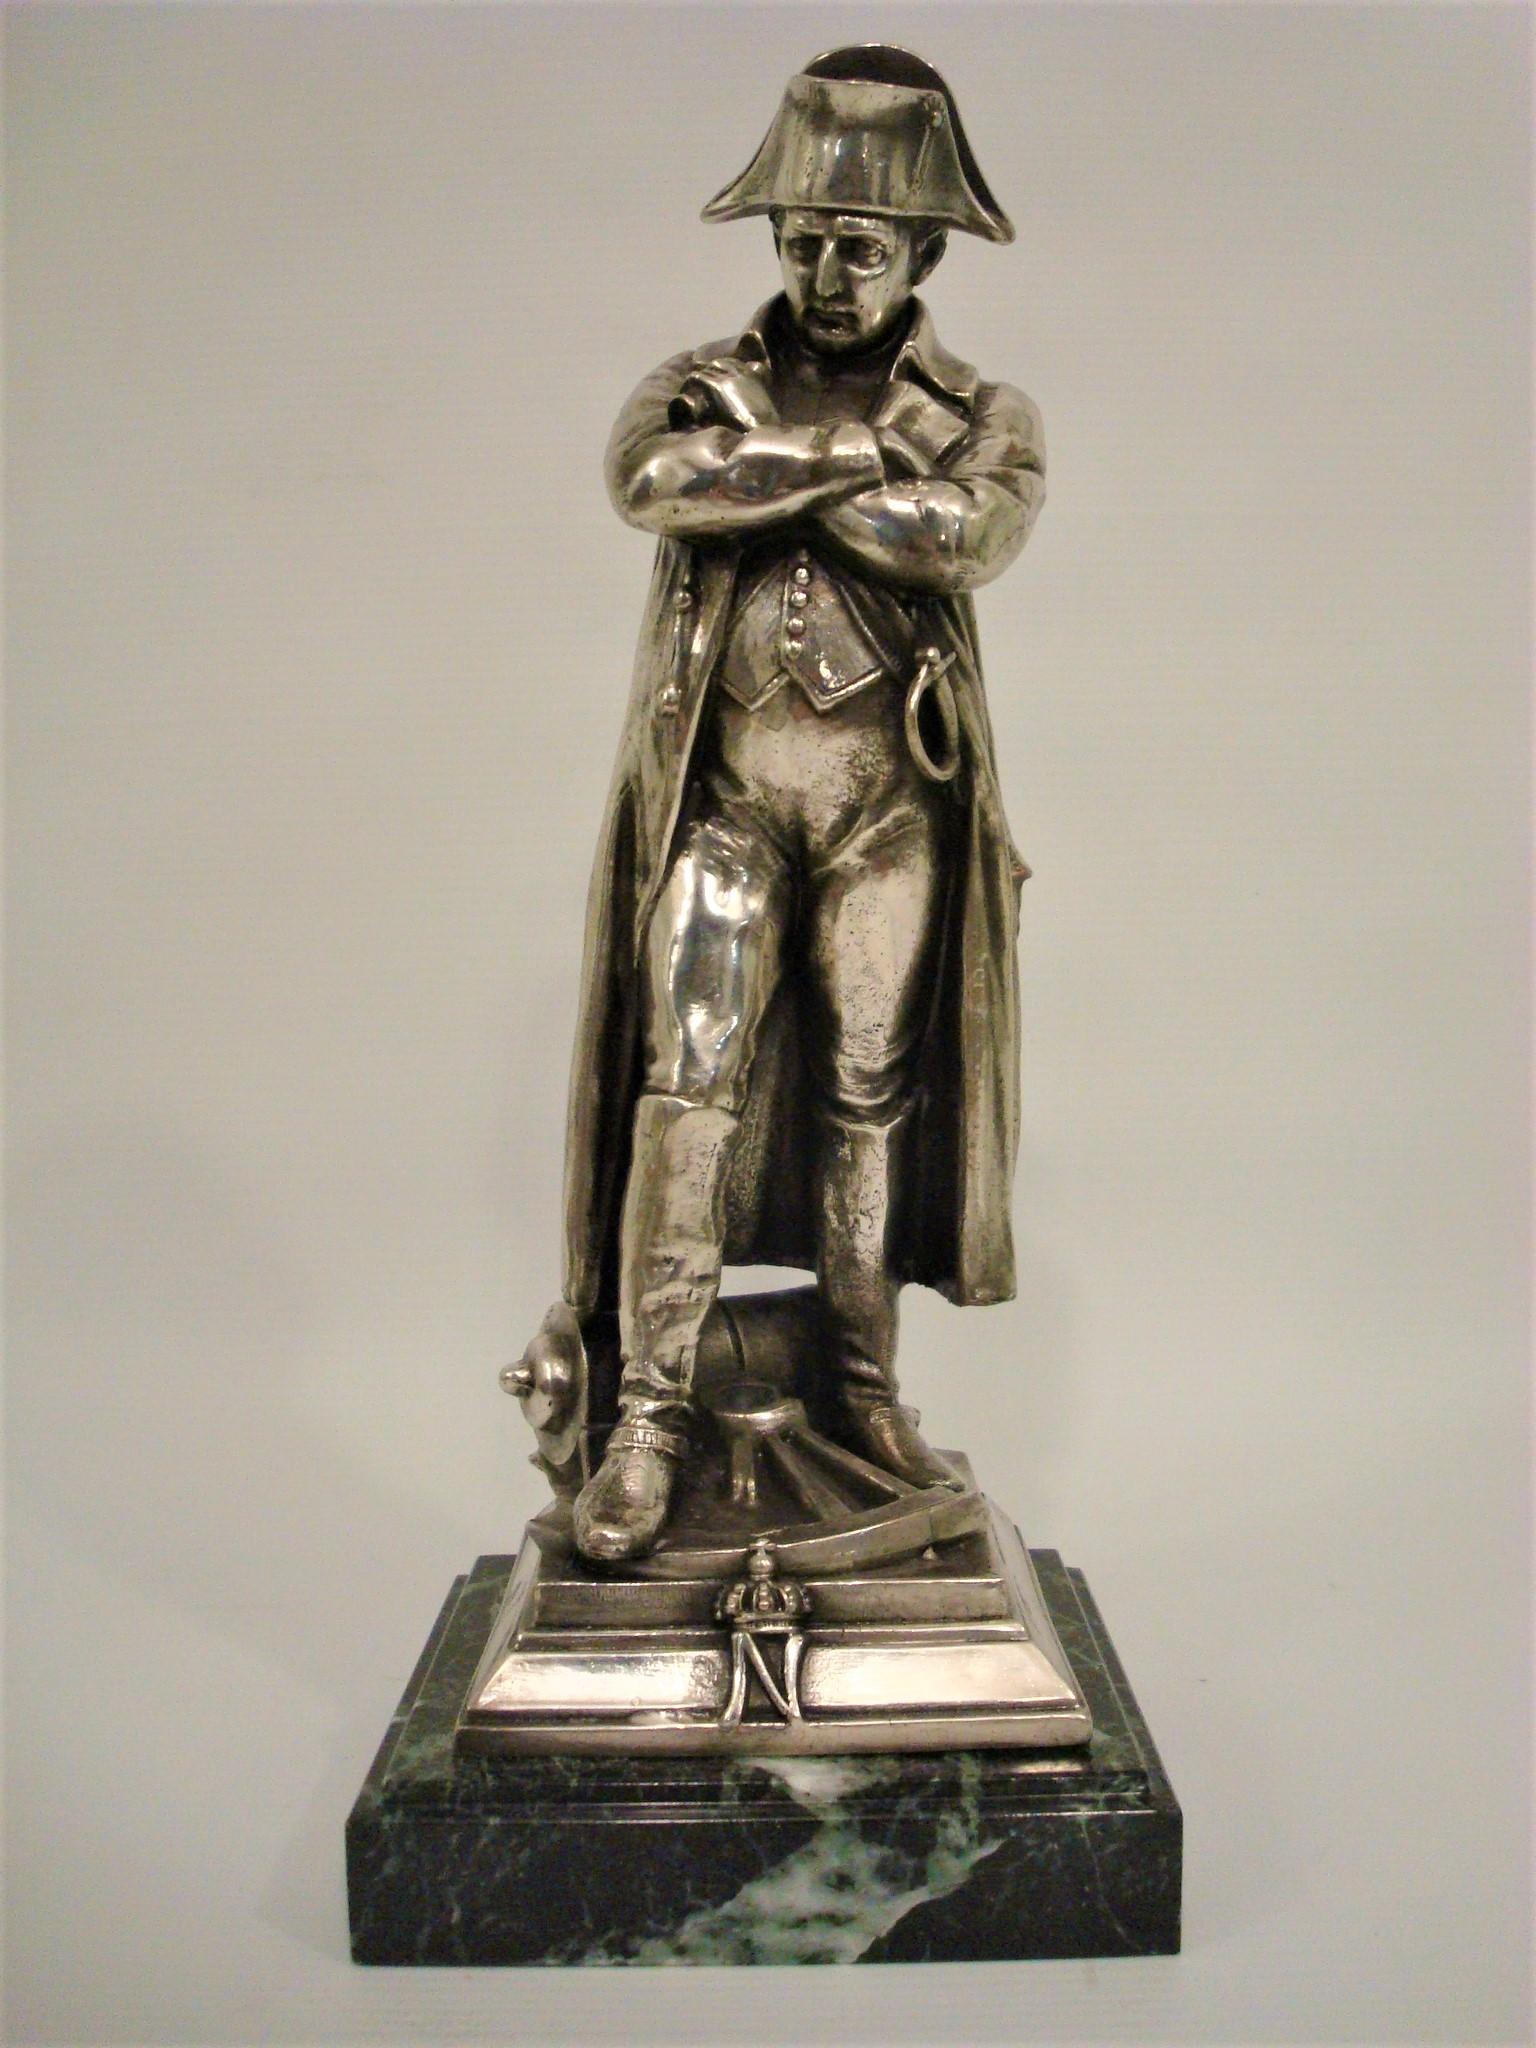 Standing Napoleon Bonaparte Sculpture - Figure. circa 1900 France.
Very nice Napoleon Sculpture, perfect size to decorate a desk. Silvered metal over a dark green marble base.
Very nice details.